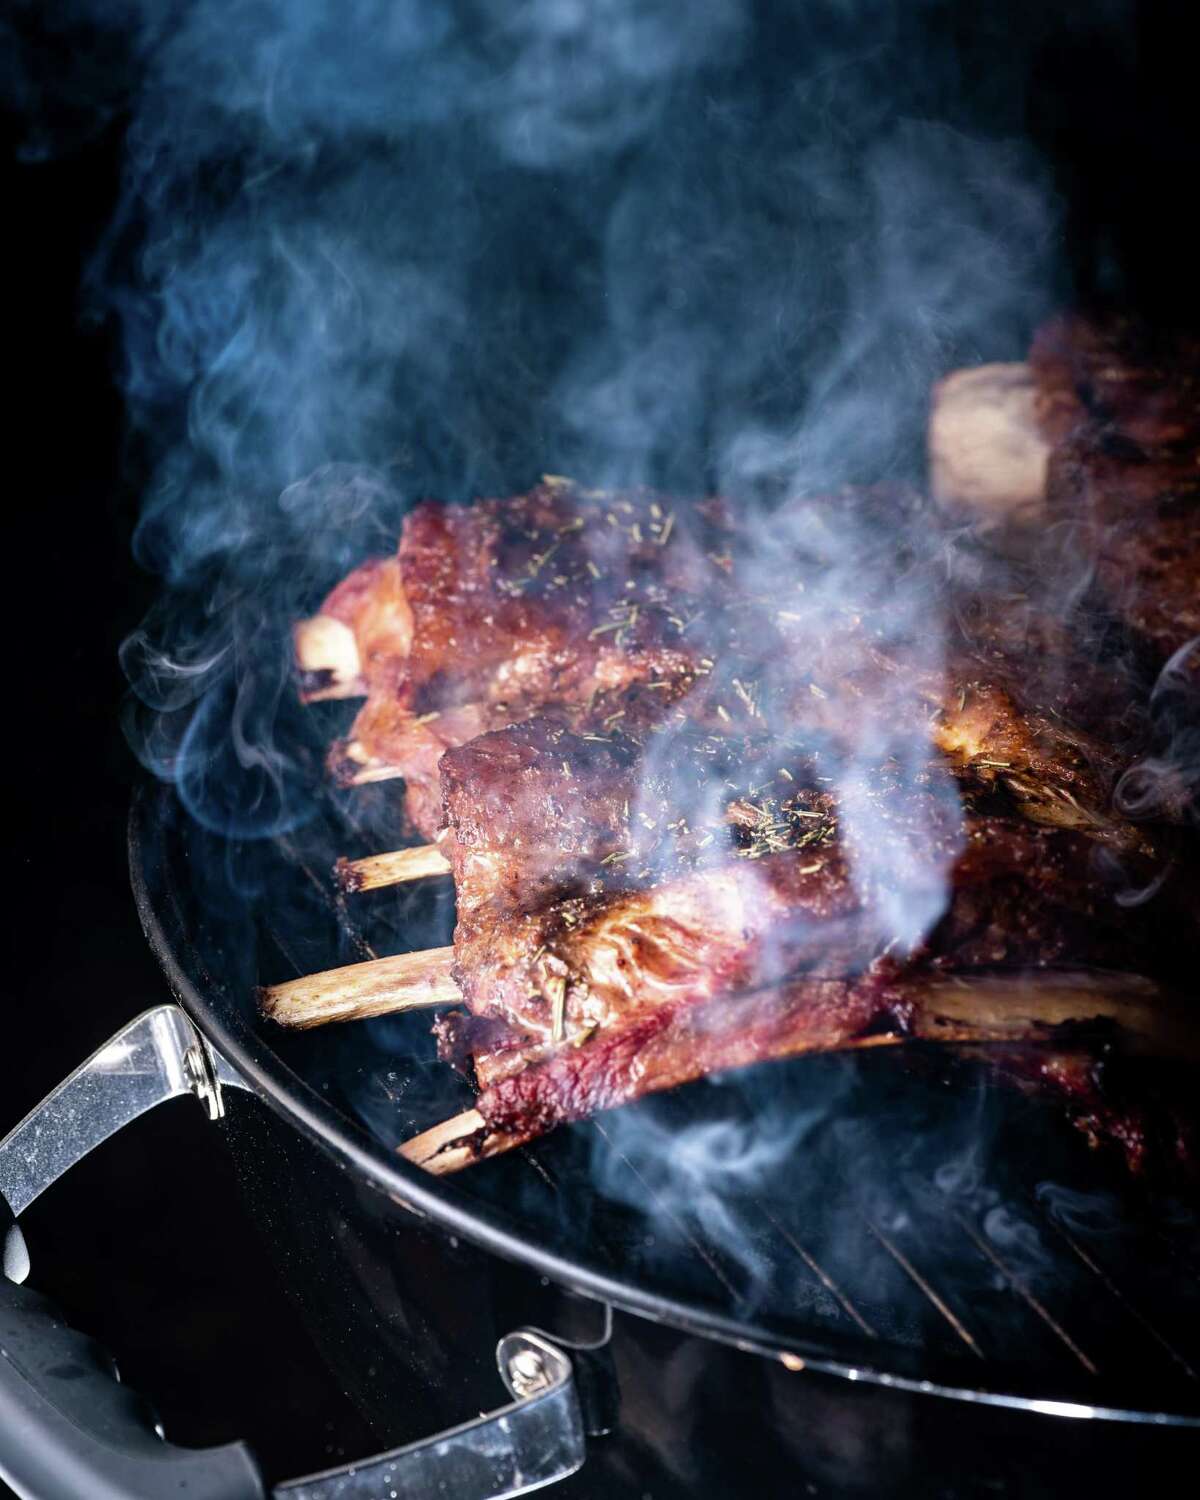 If your smoke looks this dark, your meat is ruined. You need to clean your pit and work on getting better airflow.